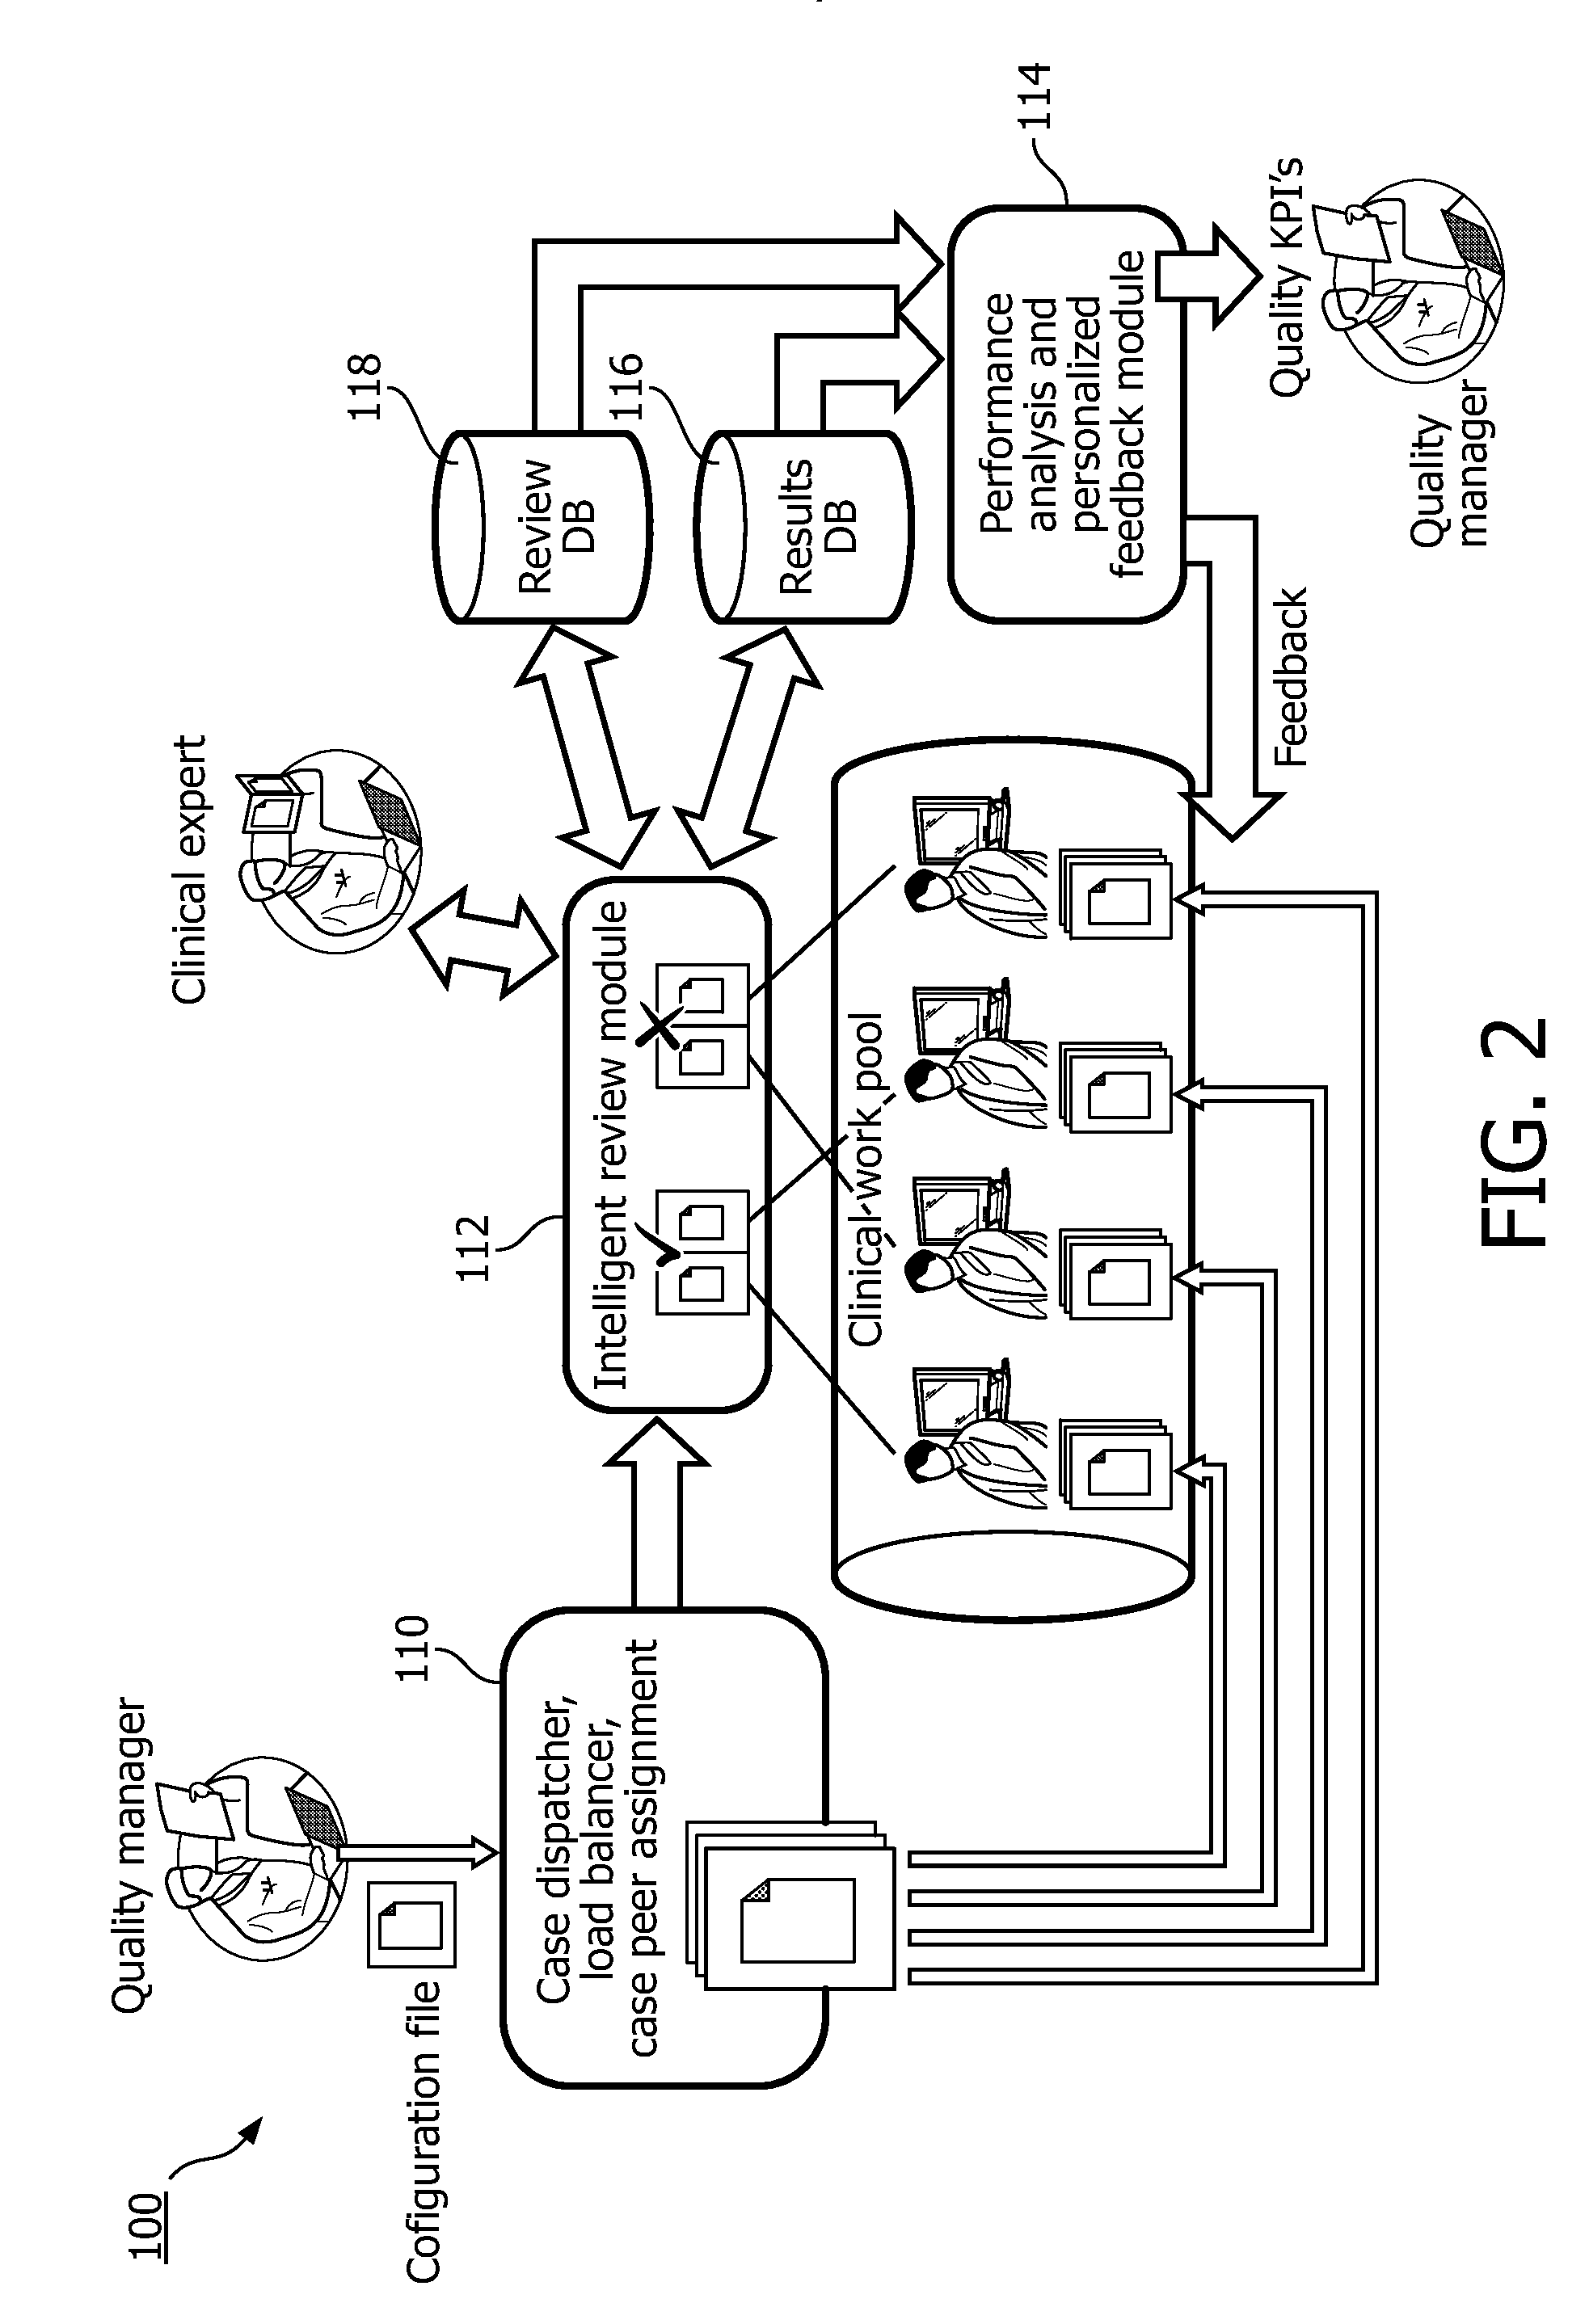 System and method for quality review of healthcare reporting and feedback